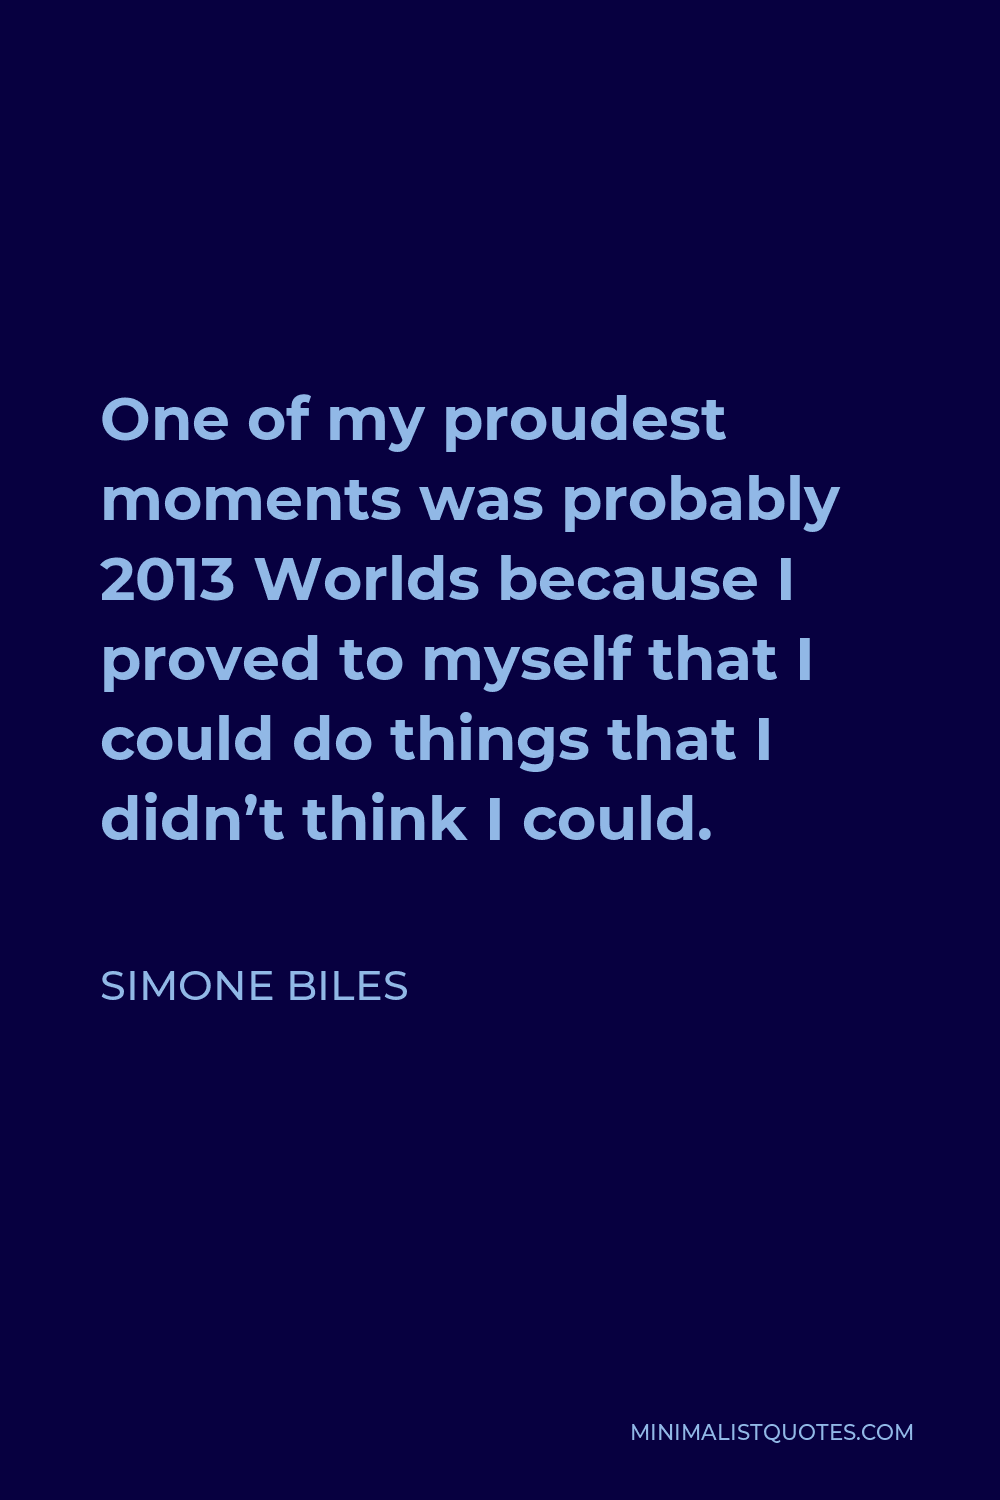 Simone Biles Quote - One of my proudest moments was probably 2013 Worlds because I proved to myself that I could do things that I didn’t think I could.